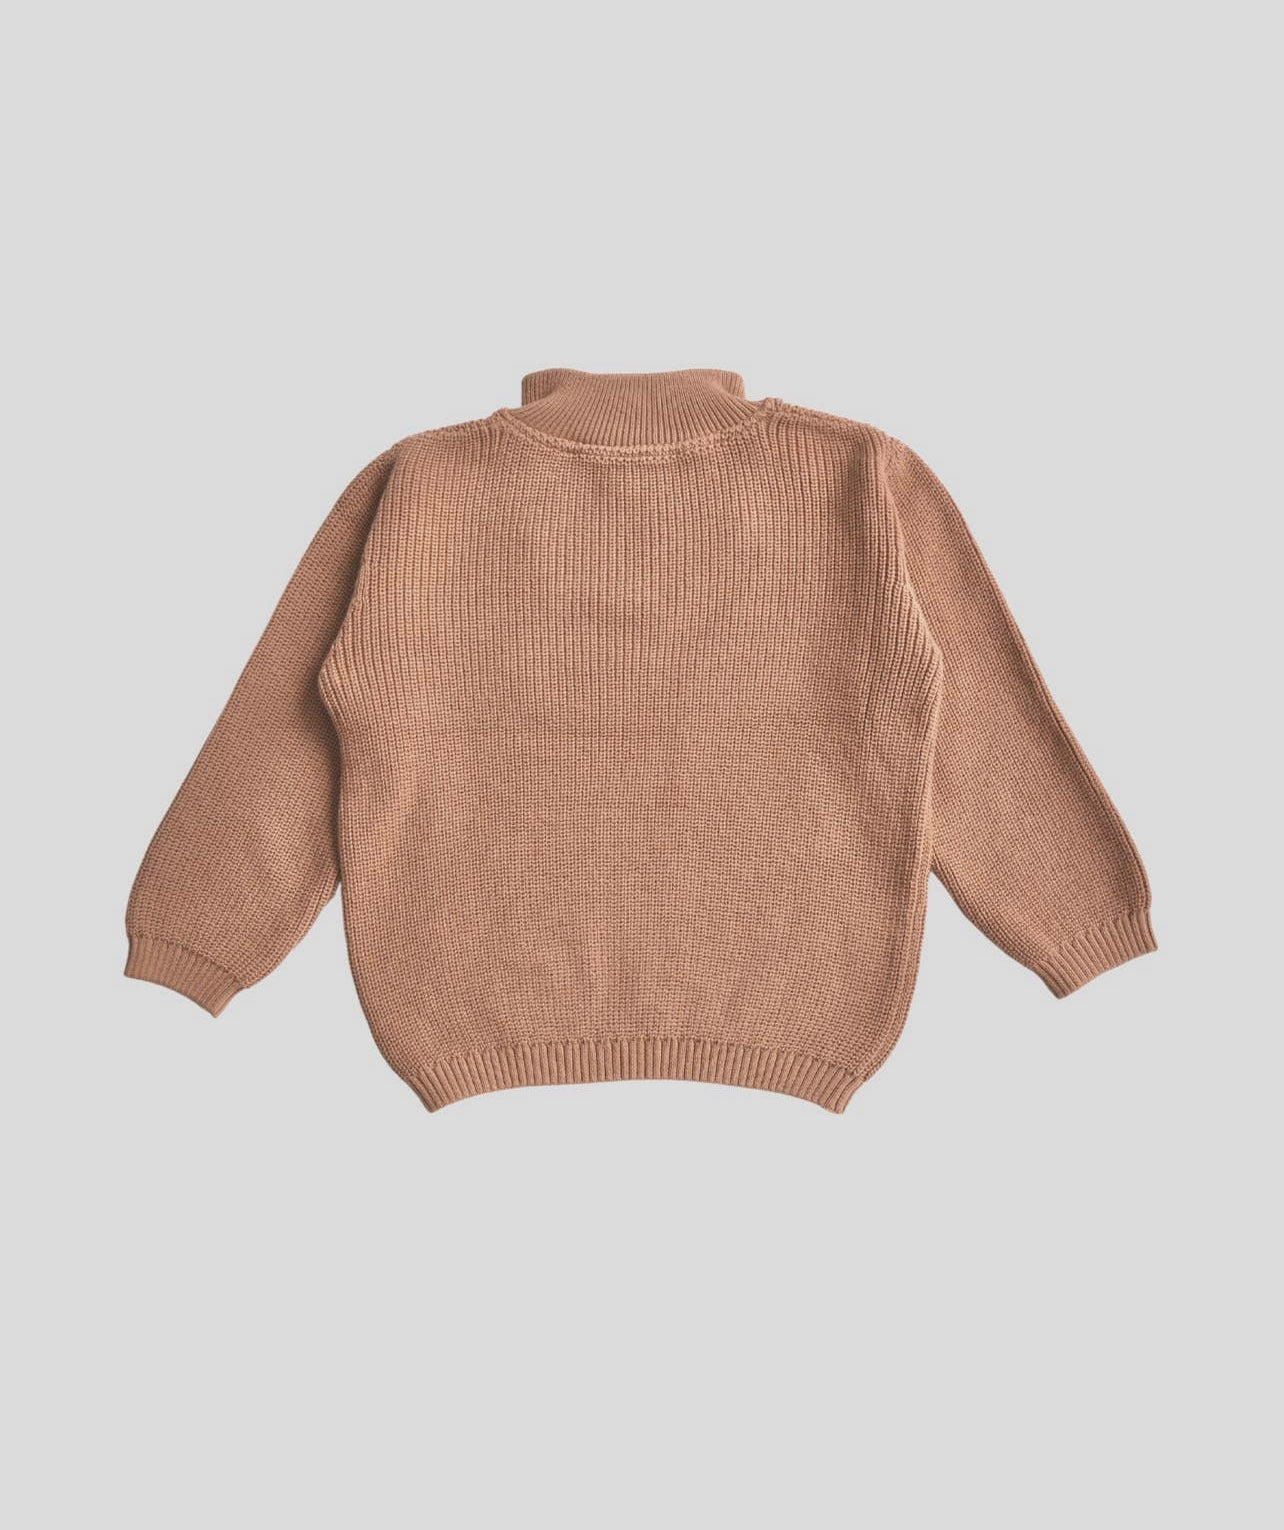 Toddler Neutral Sweater